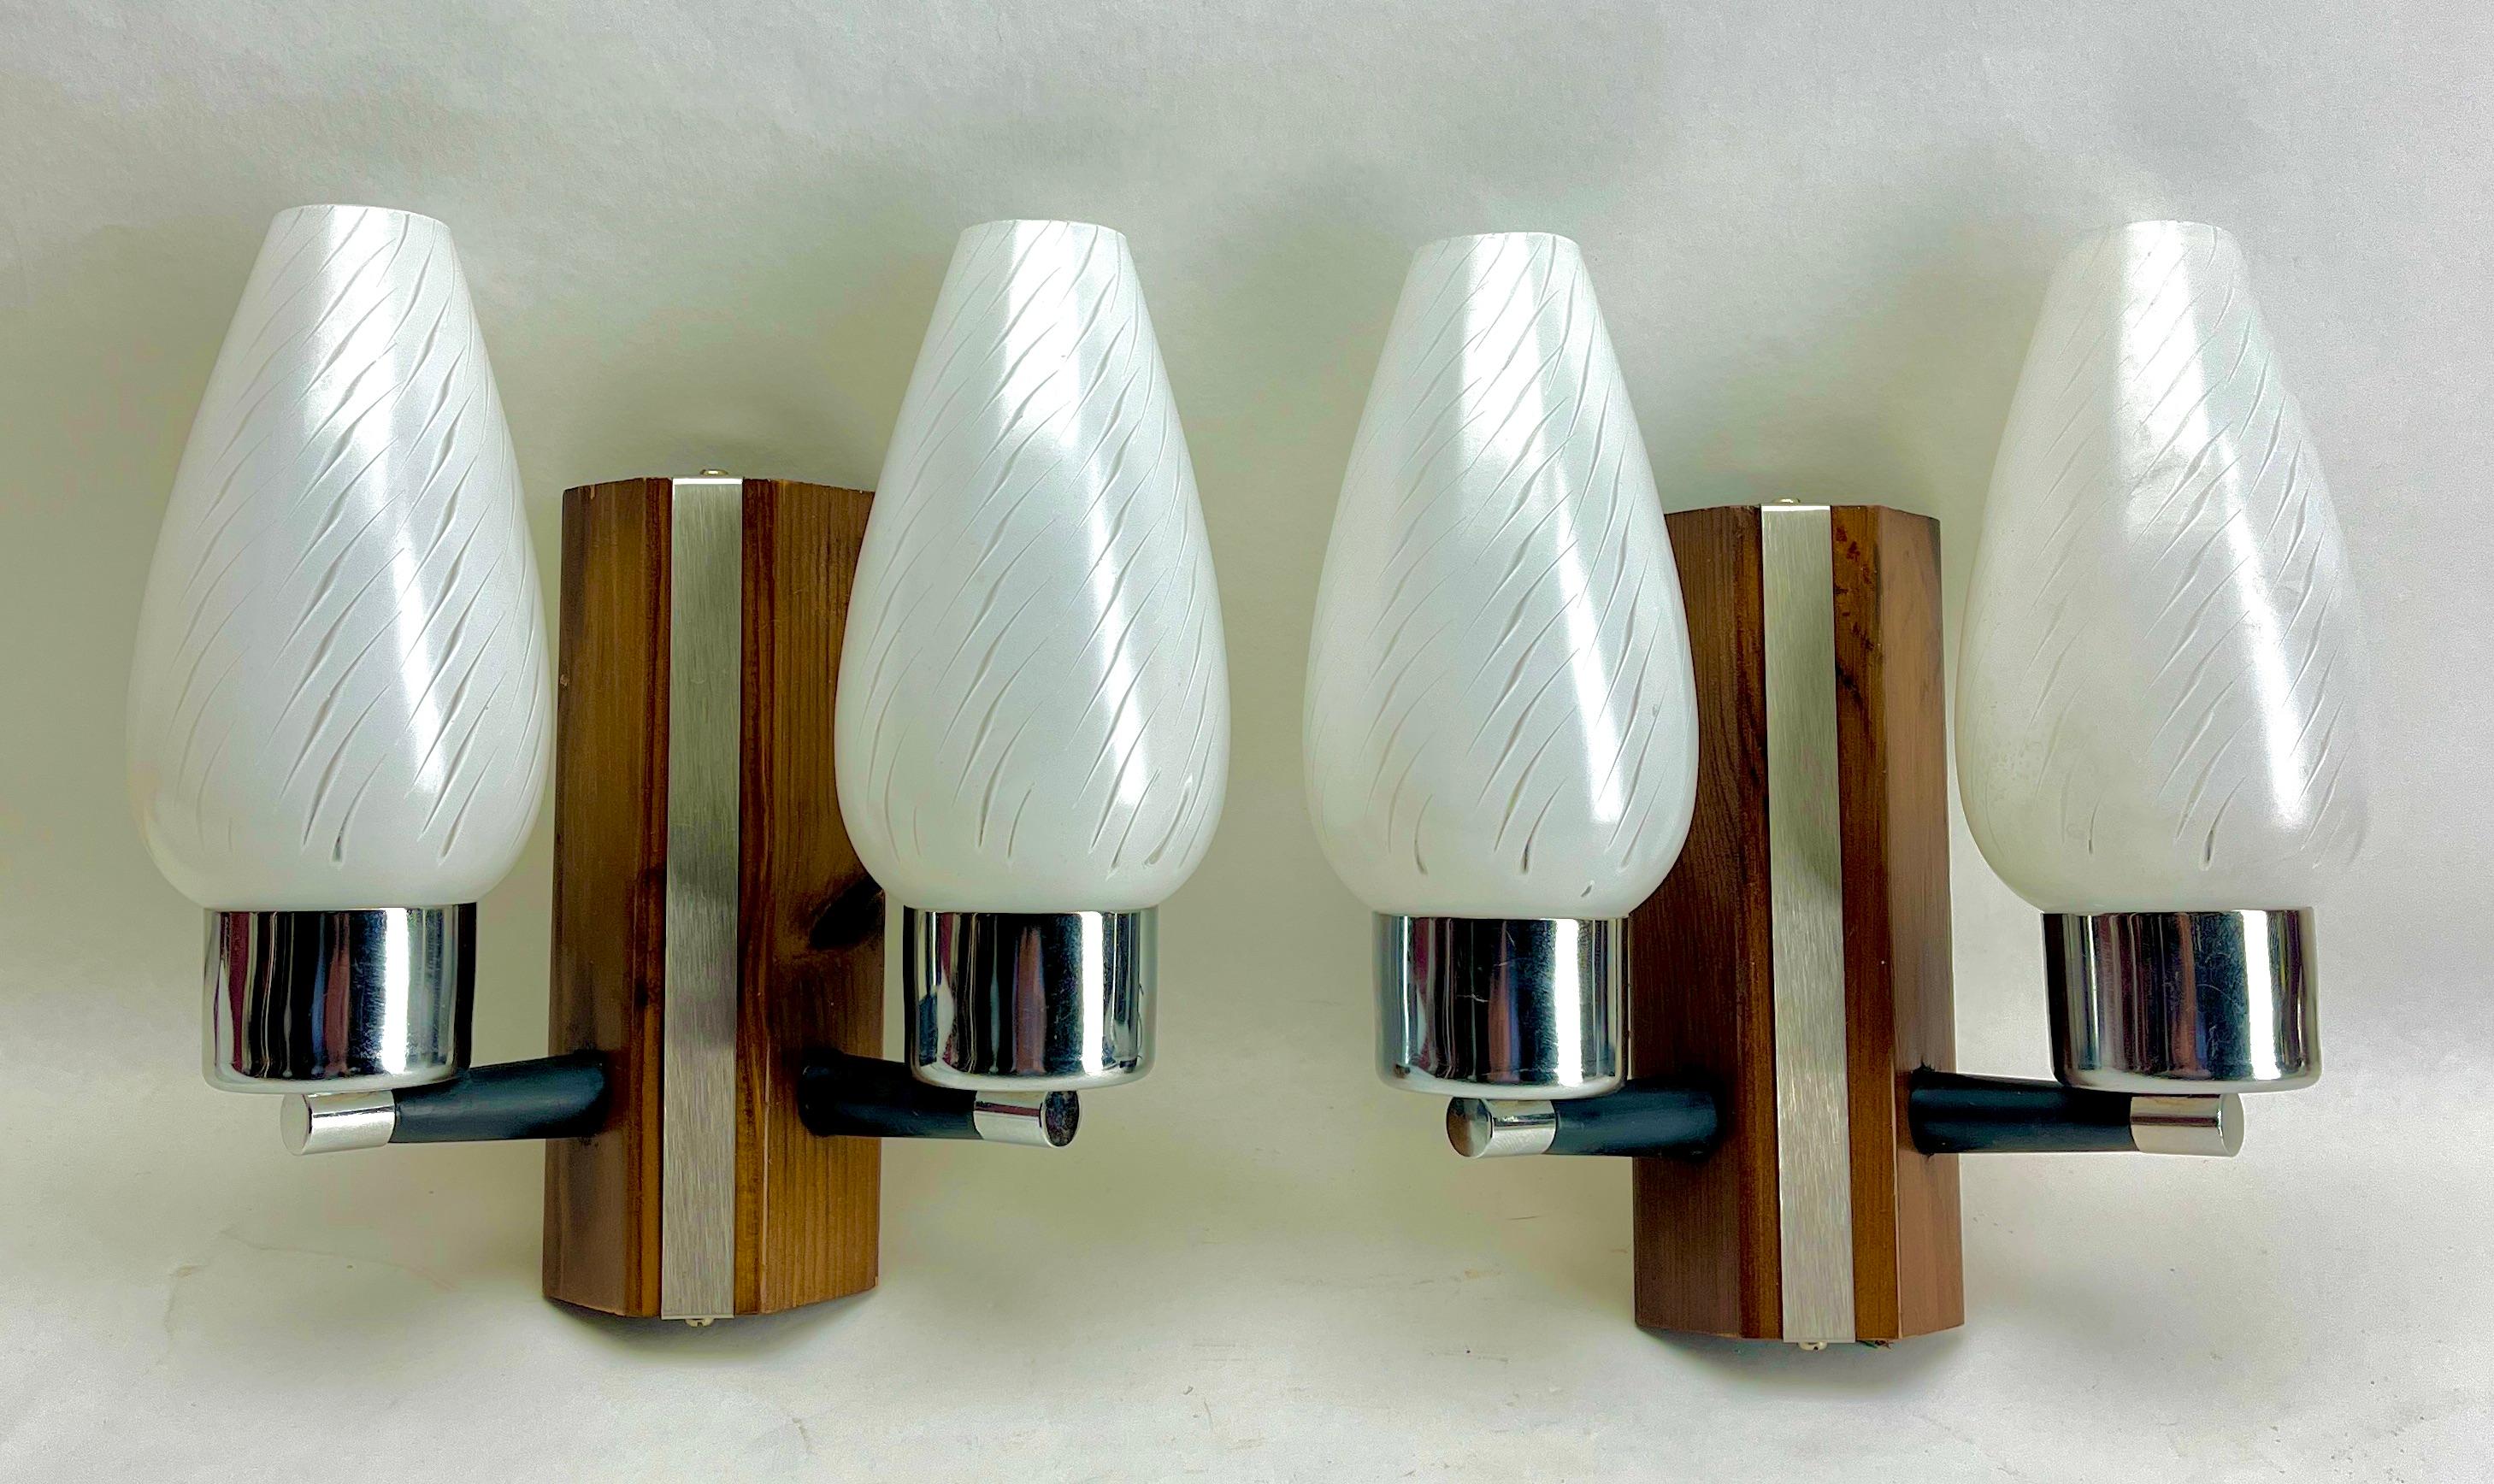 Vintage 2 arm pair of wall mount lamps, the 1960s.
Hillebrand Germany.
Factory in light fixtures was founded by Egon Hillebrand in 1881, who was originally a foliage grower and installer. 
The factory was located in Neheim, Germany Mohnestrasse.

In